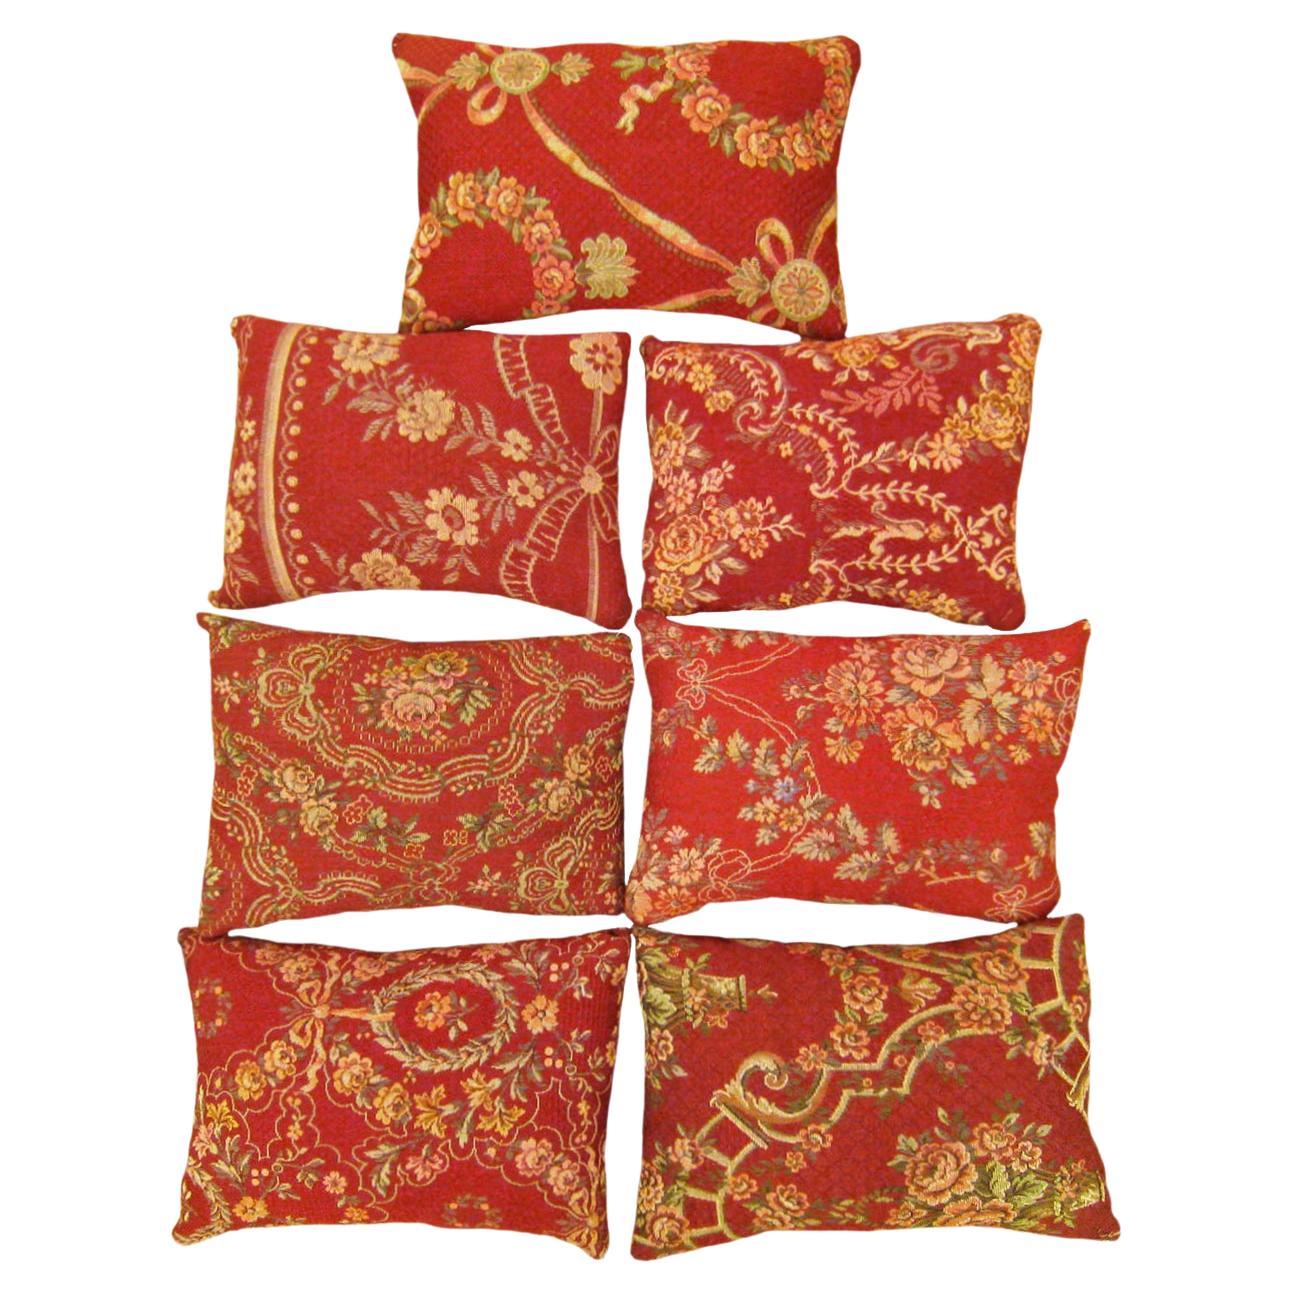 Set of Decorative Antique Jacquard Tapestry Pillows with Floral Elements